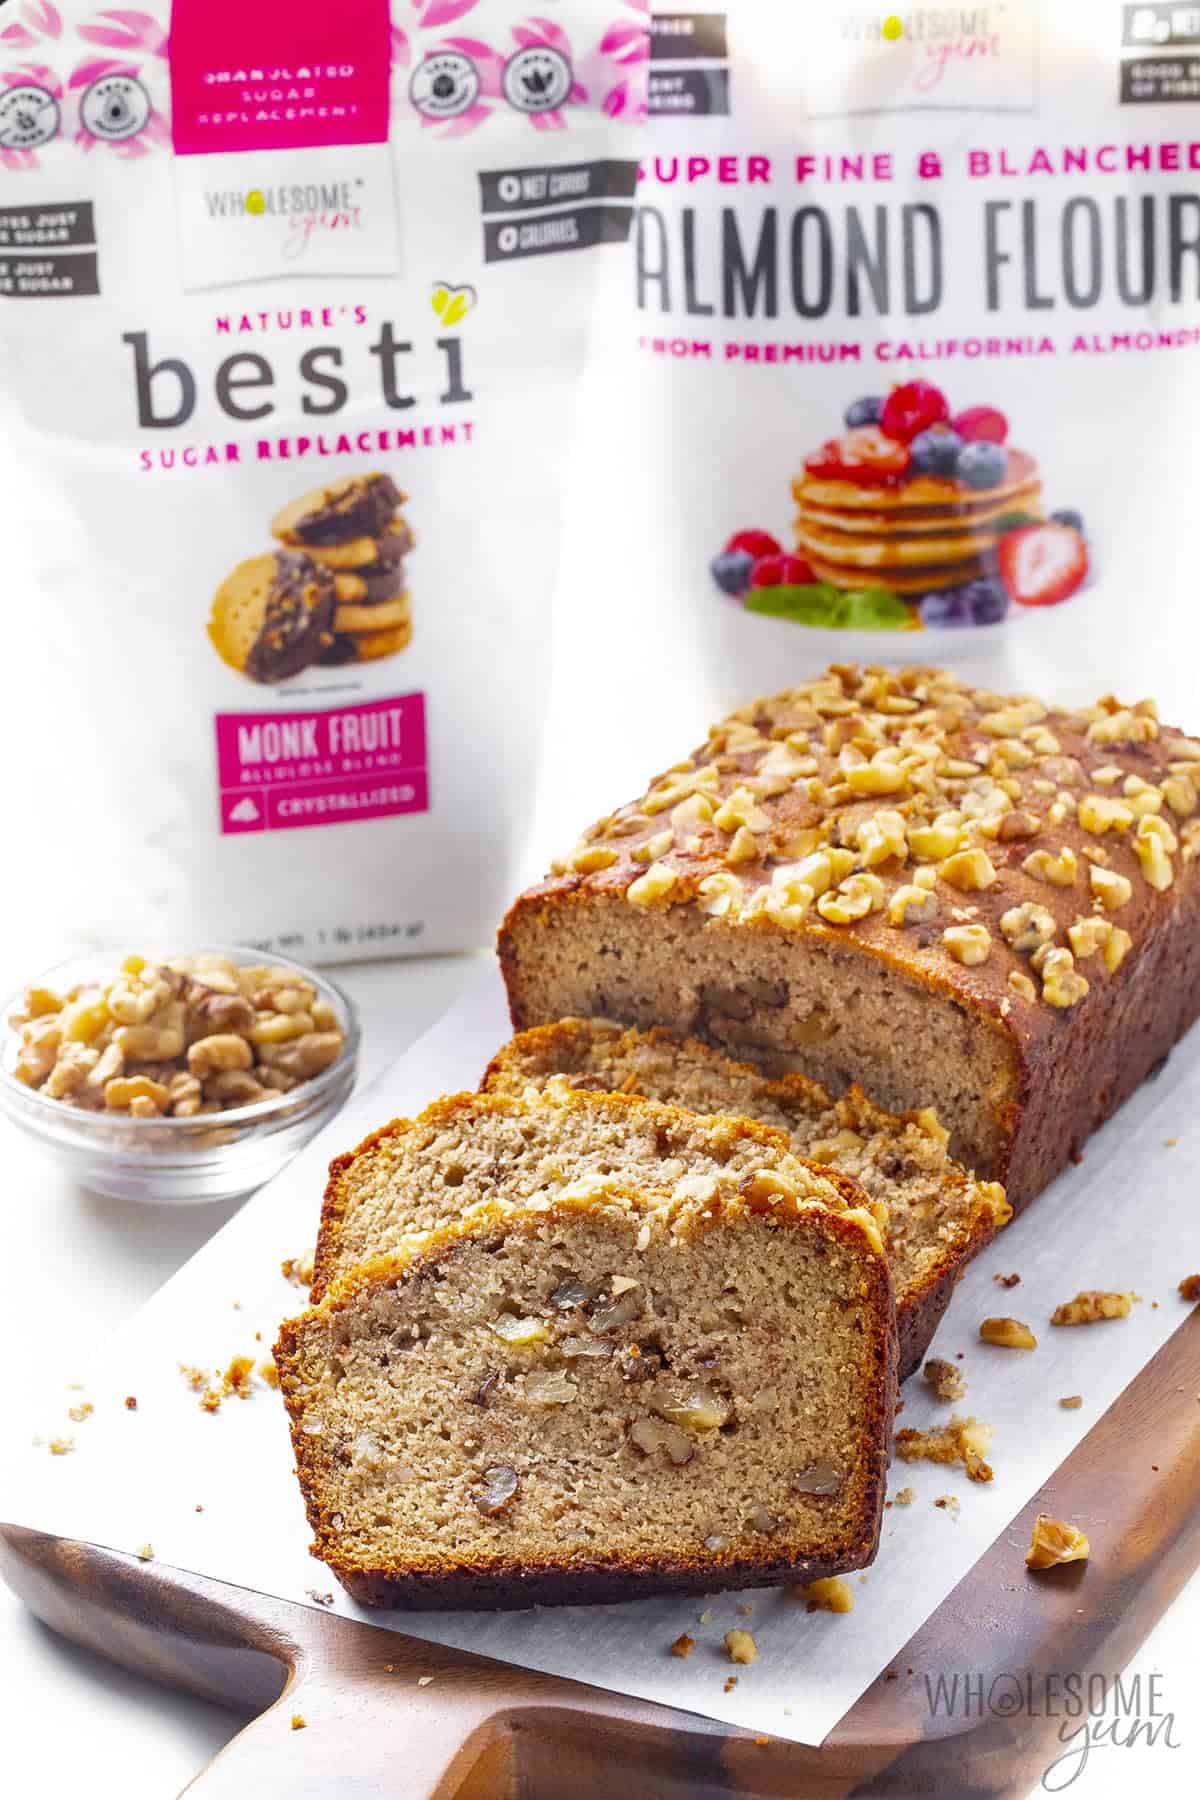 Almond flour banana bread shown with Wholesome Yum products